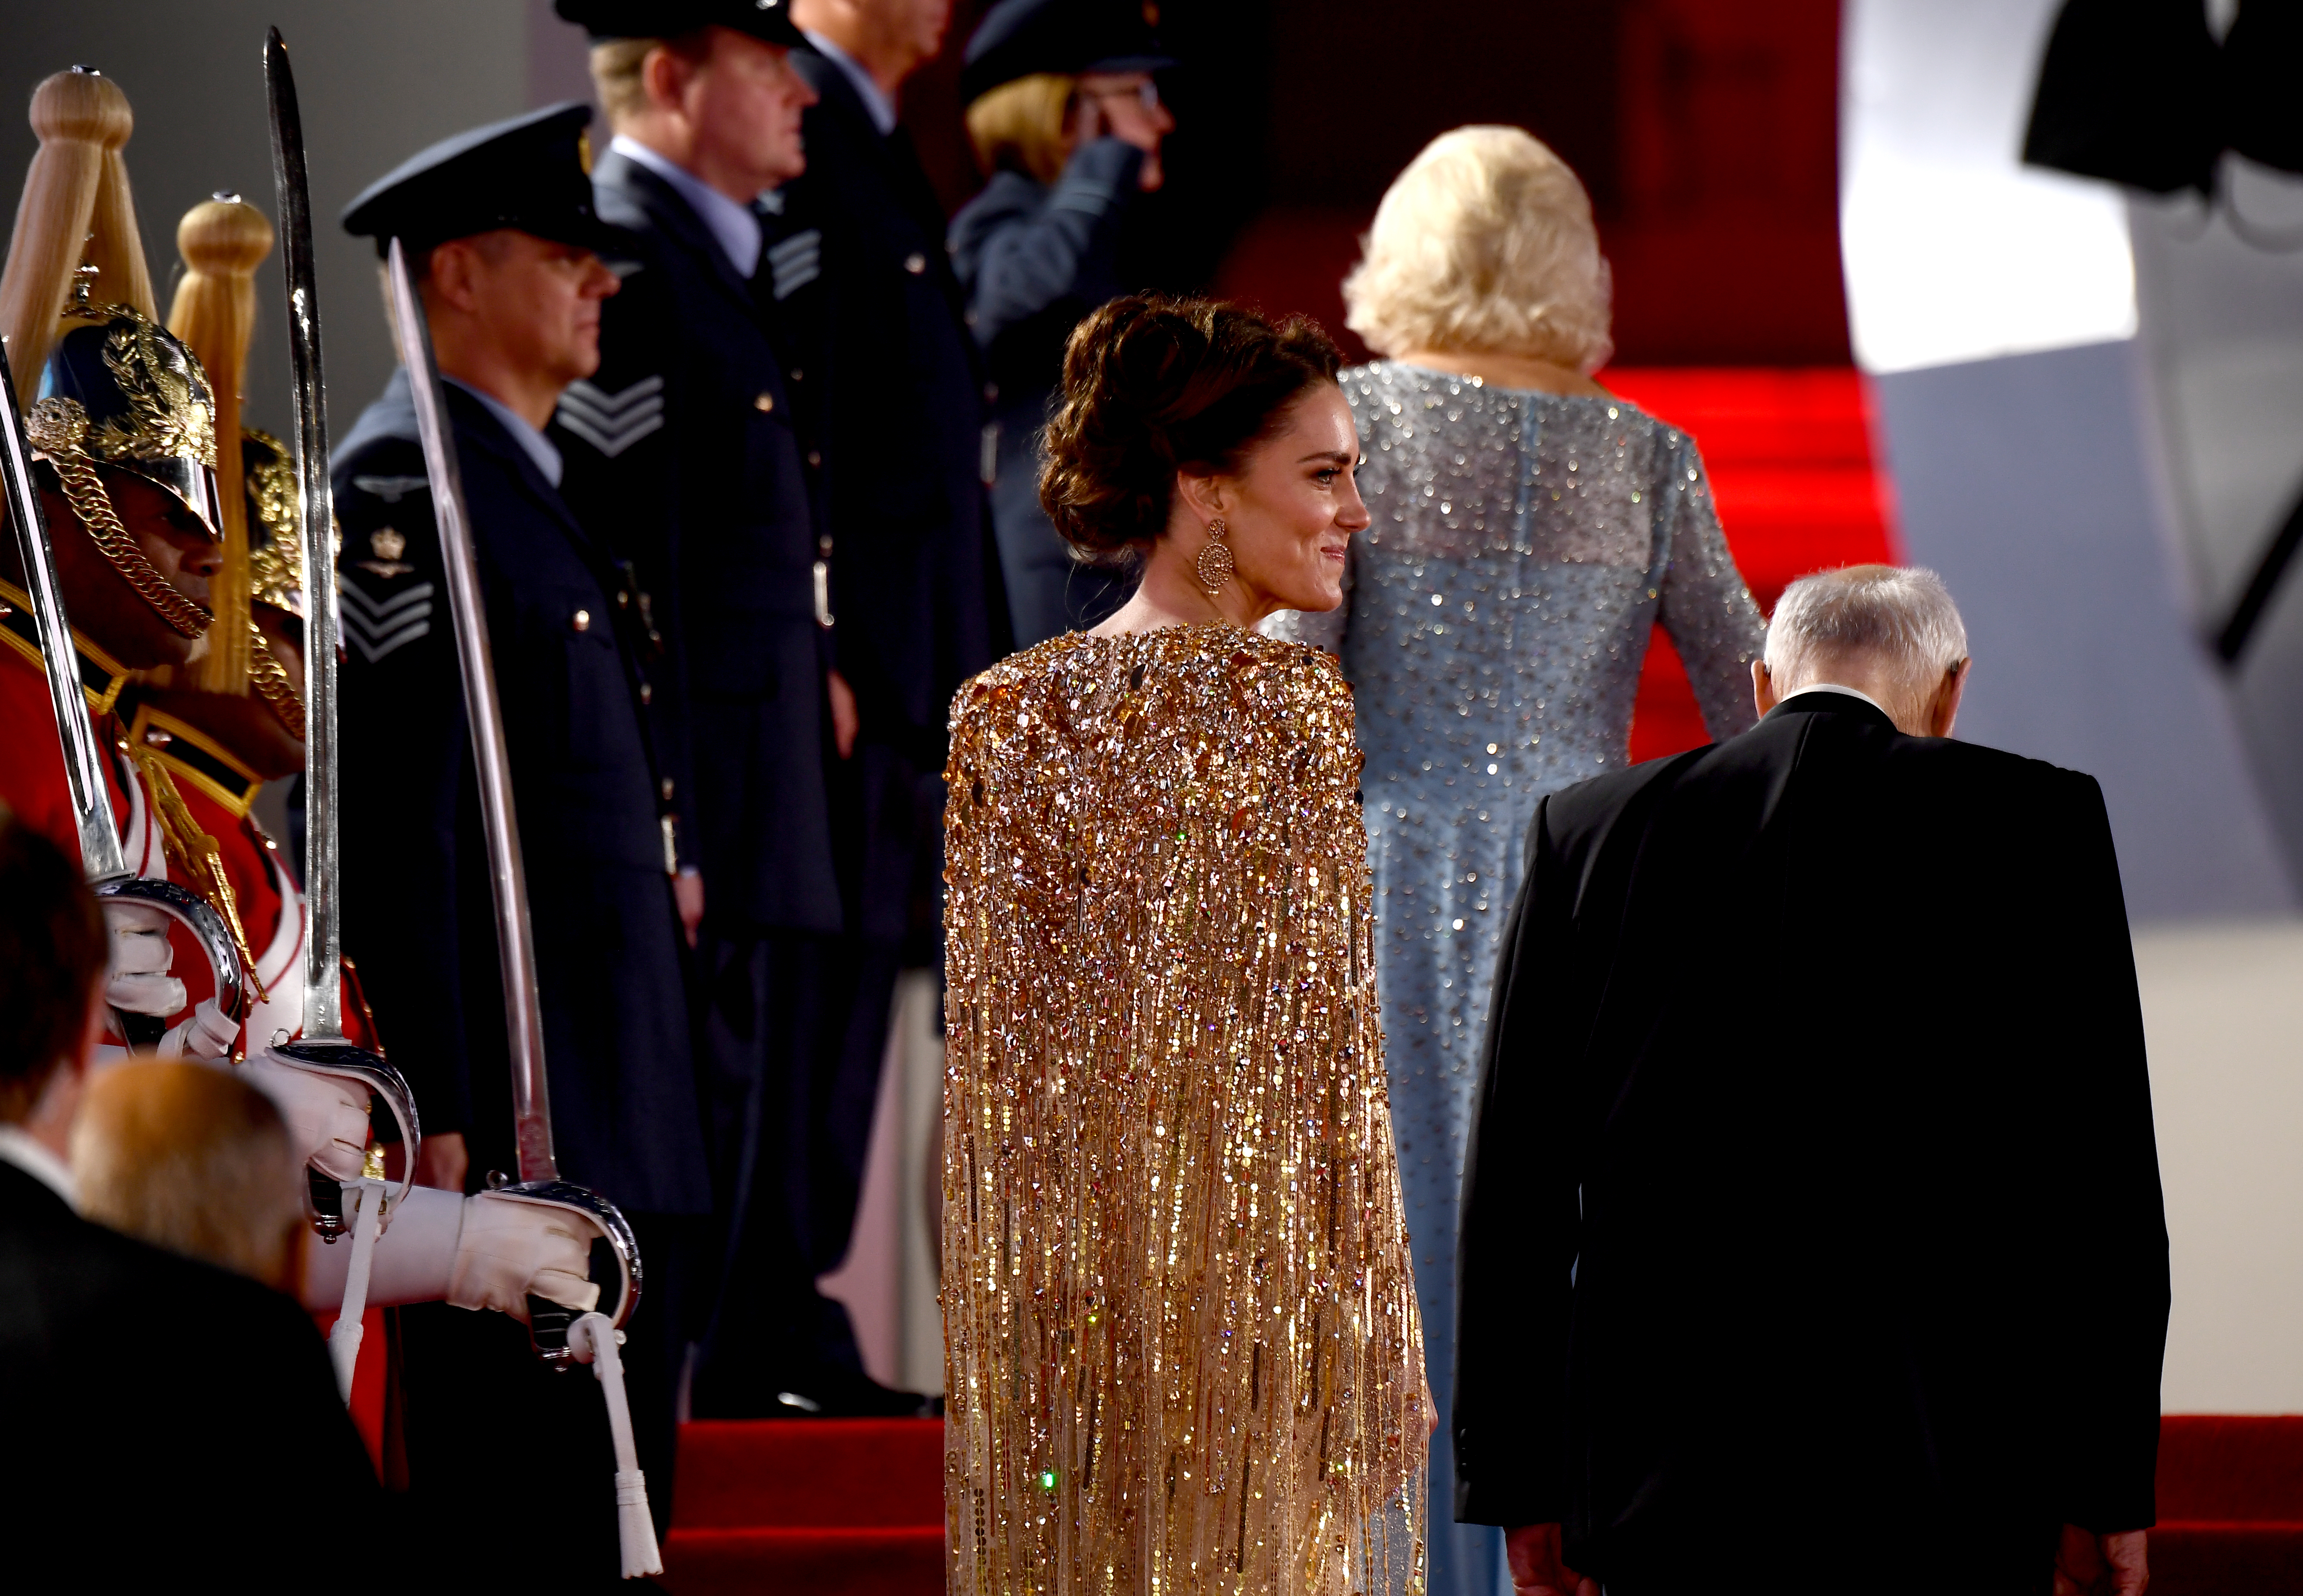 The Duchess of Cambridge on the red carpet.